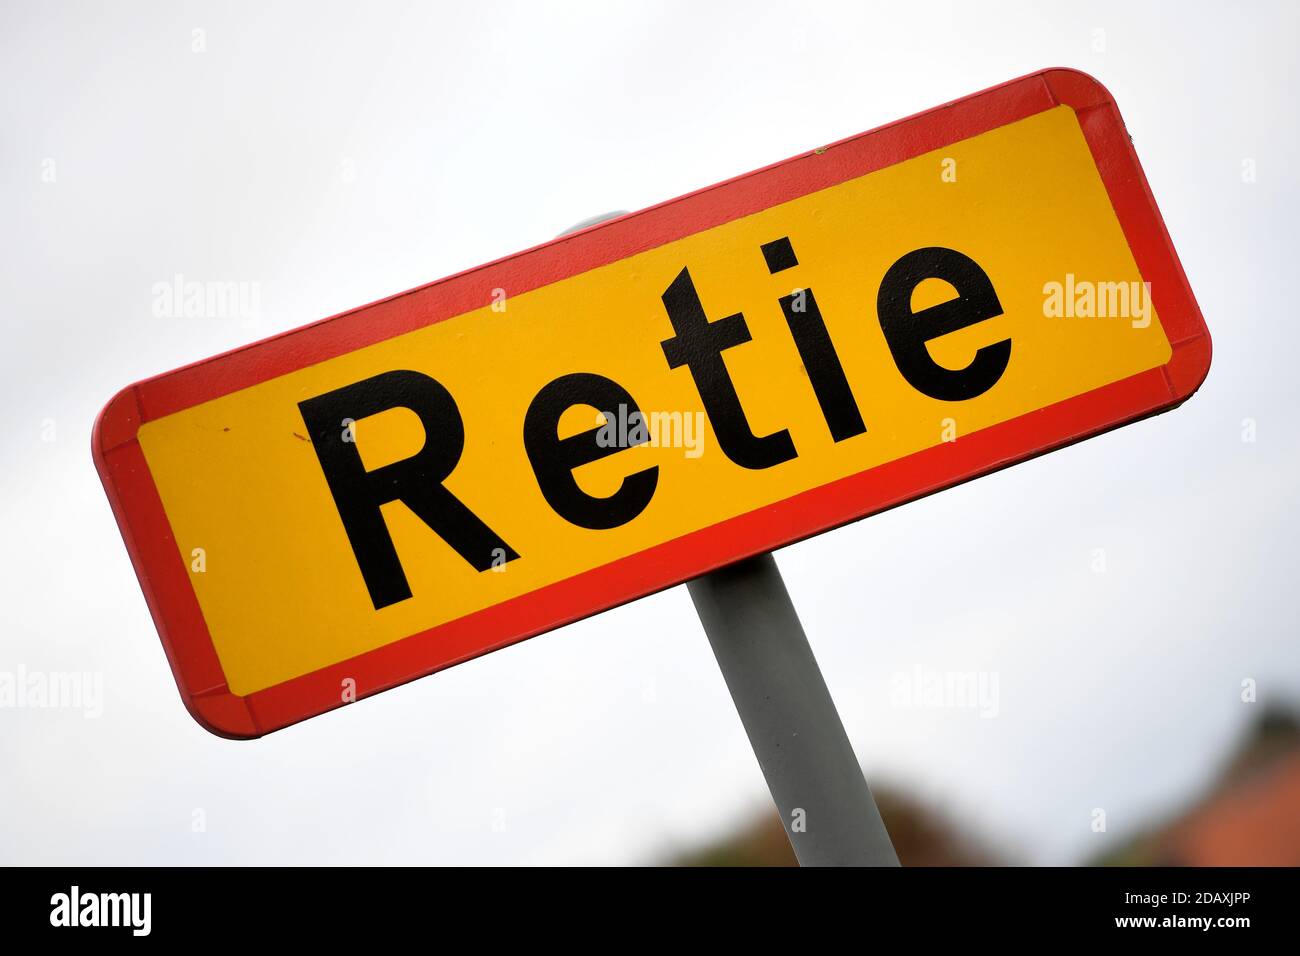 Illustration shows the name of the Retie municipality on a road sign, Friday 21 September 2018. BELGA PHOTO YORICK JANSENS Stock Photo